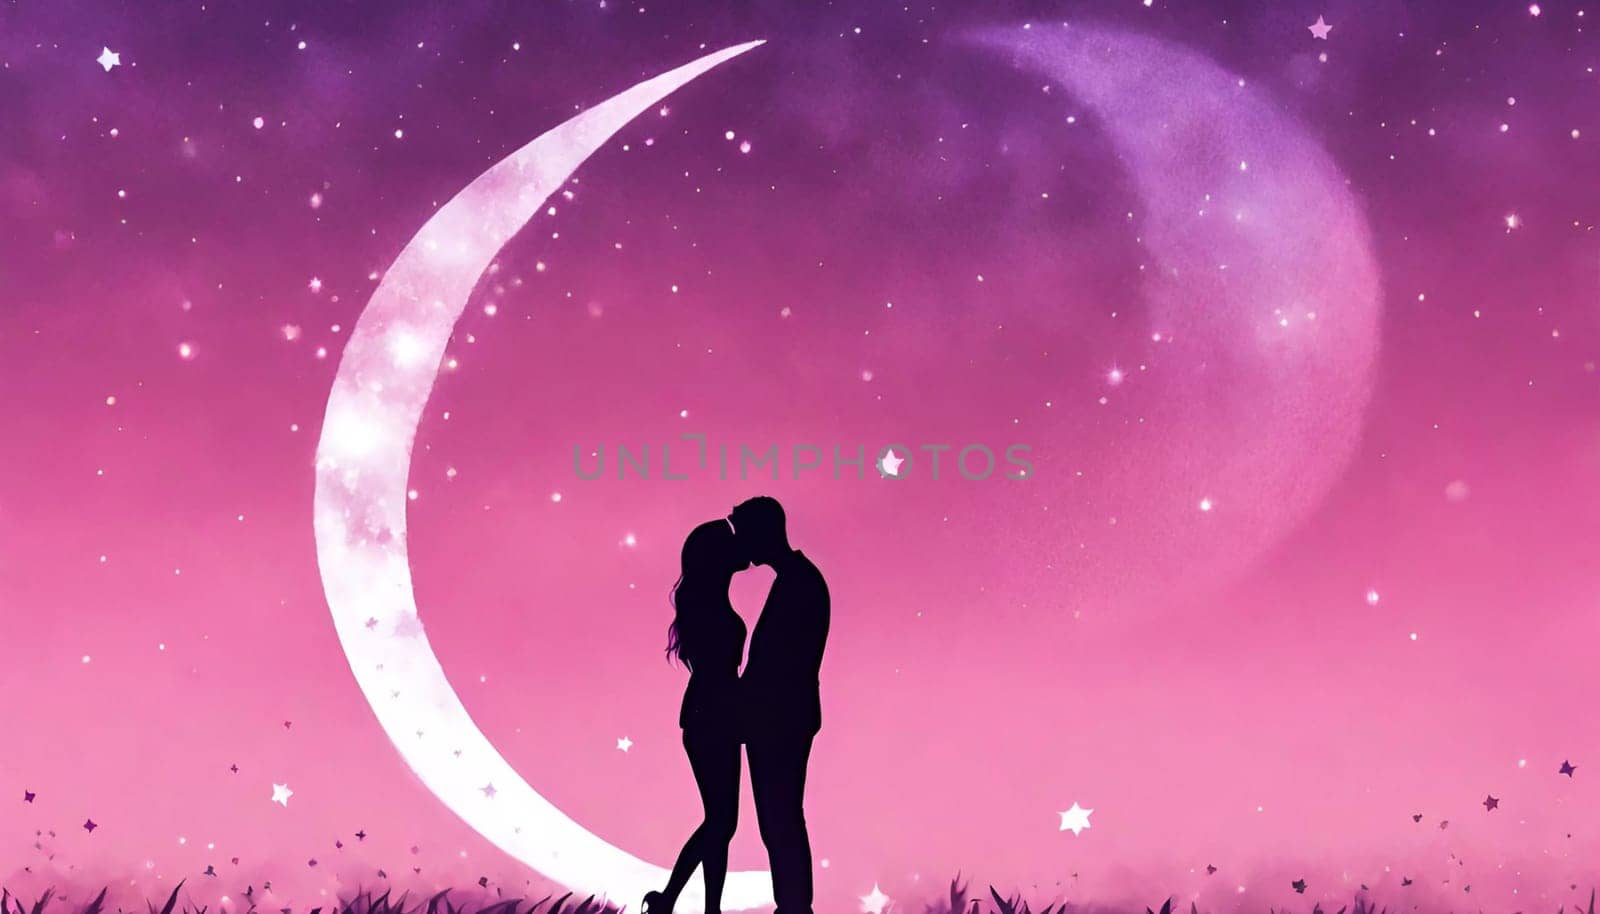 valentine's Day. A pink and purple sky with a crescent moon and stars. with a couple holding hands and kissing in the foreground.Happy Valentine's Day c